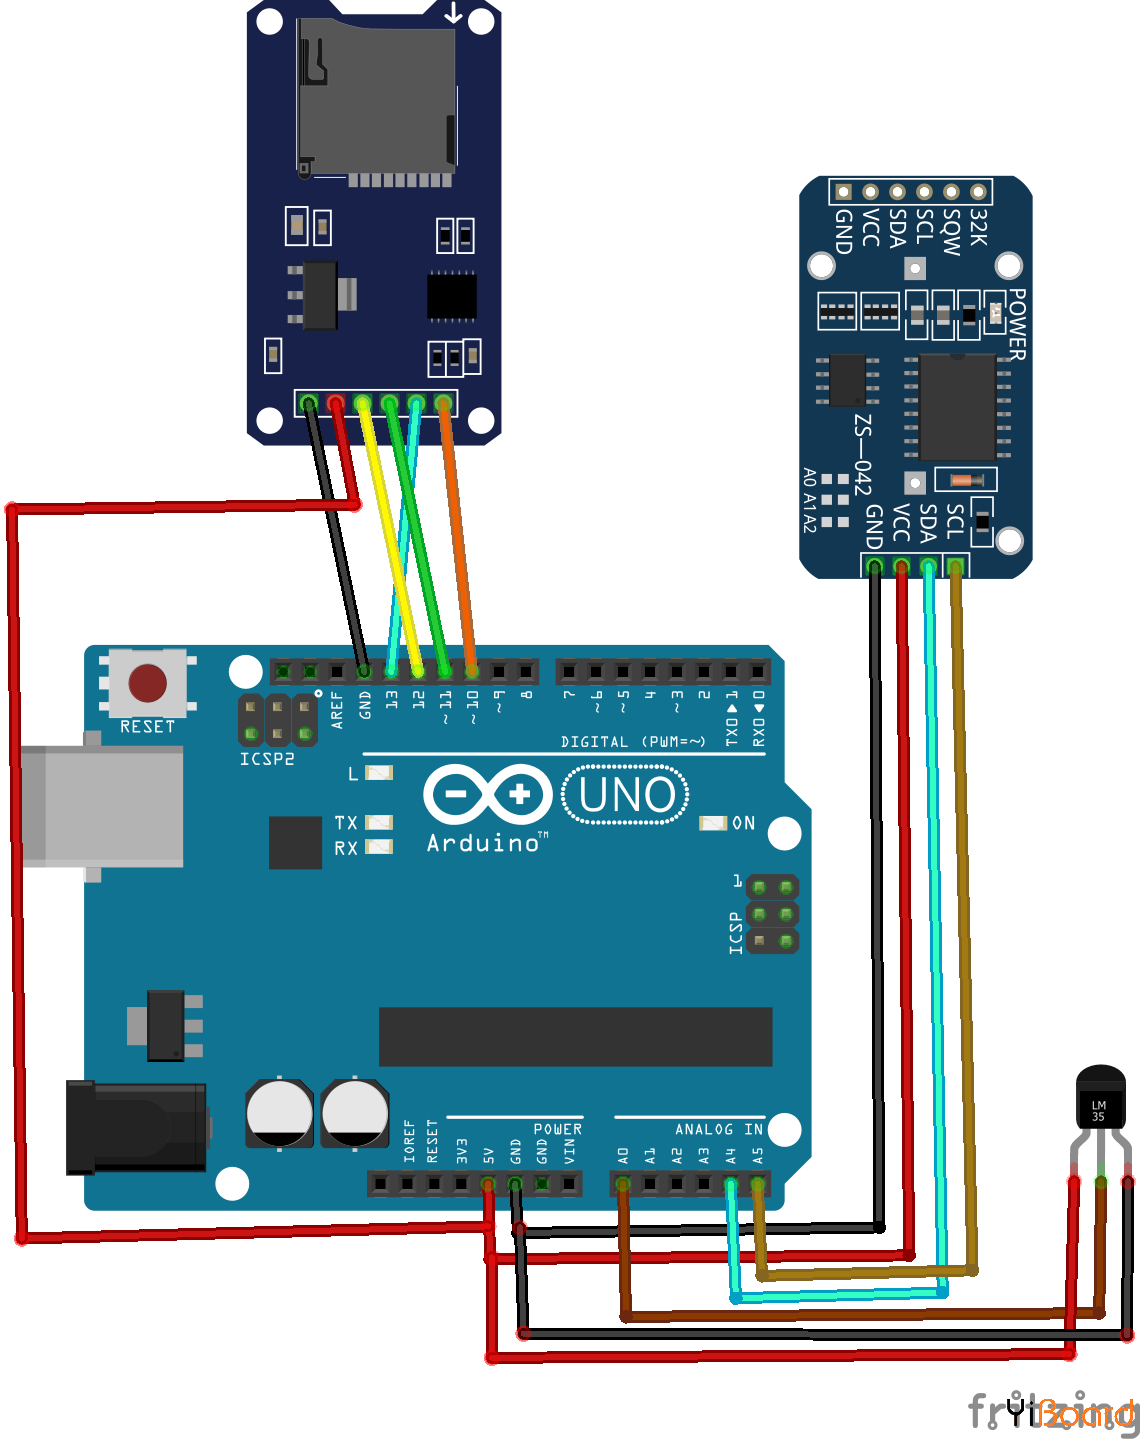 The SPI pins on the Arduino.png